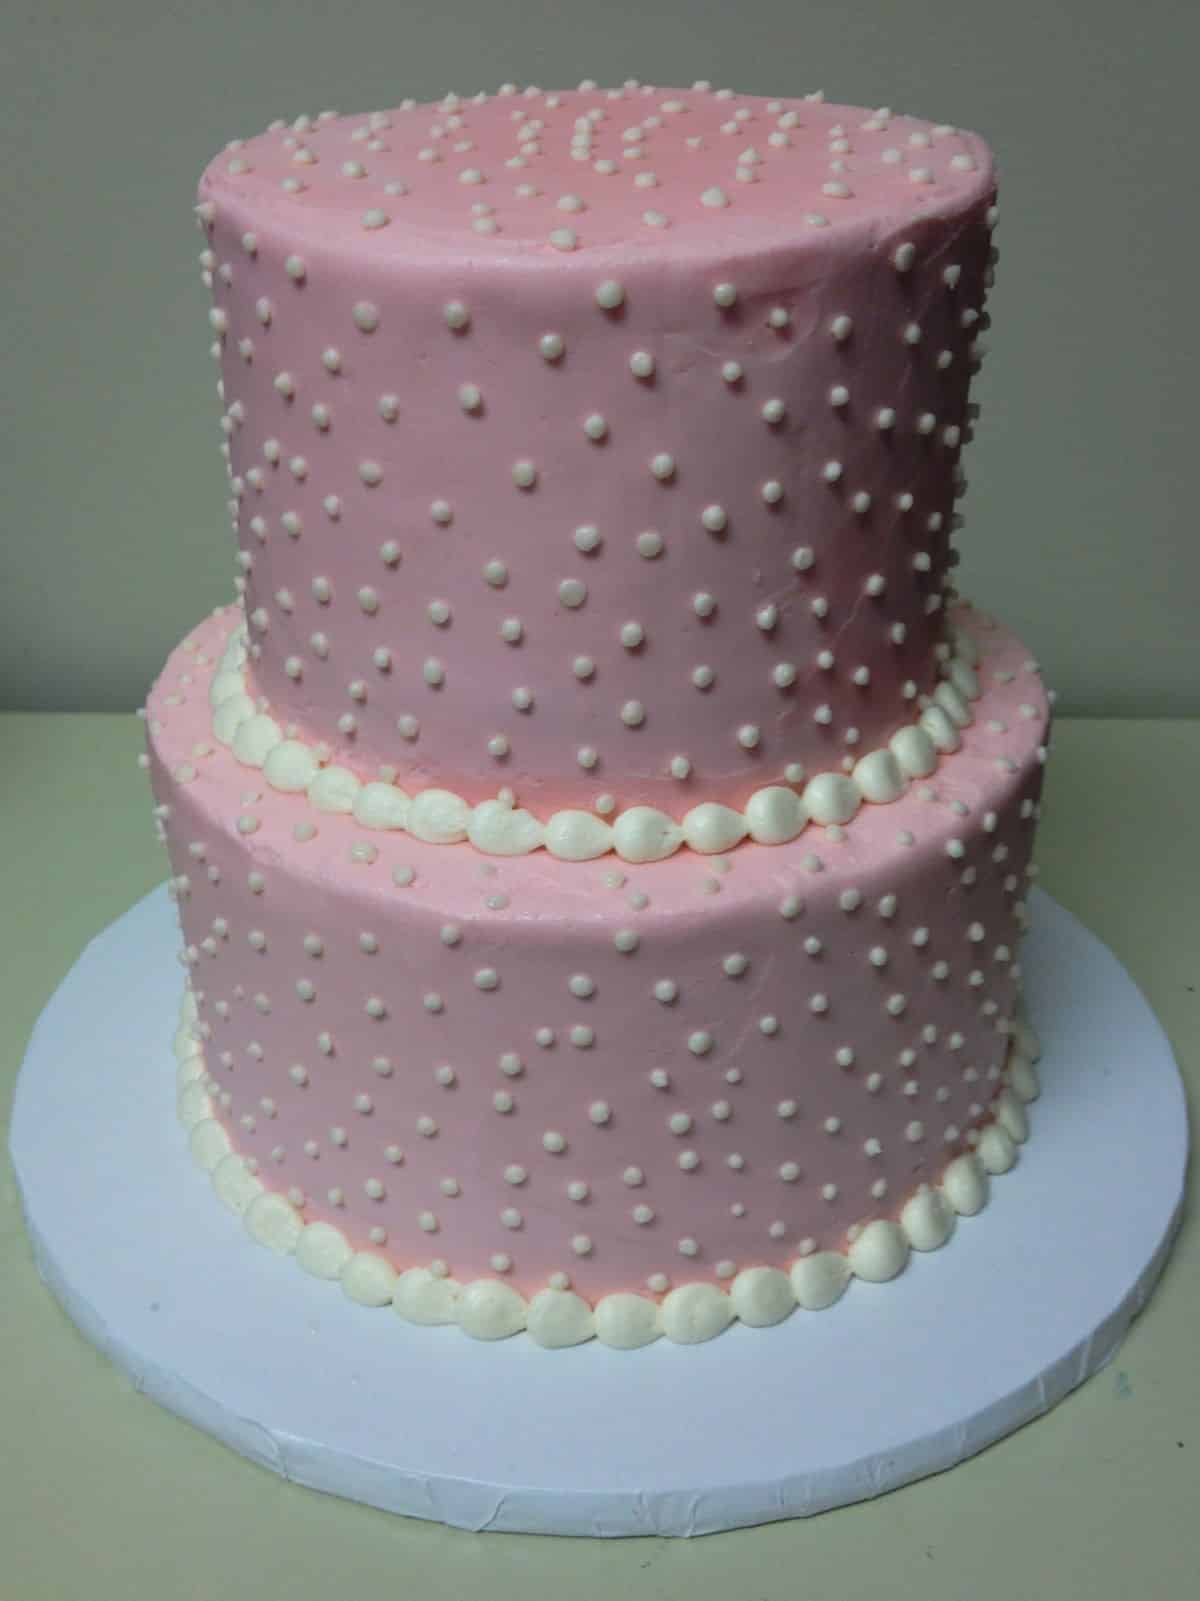 A pink minimalist cake with white dots.